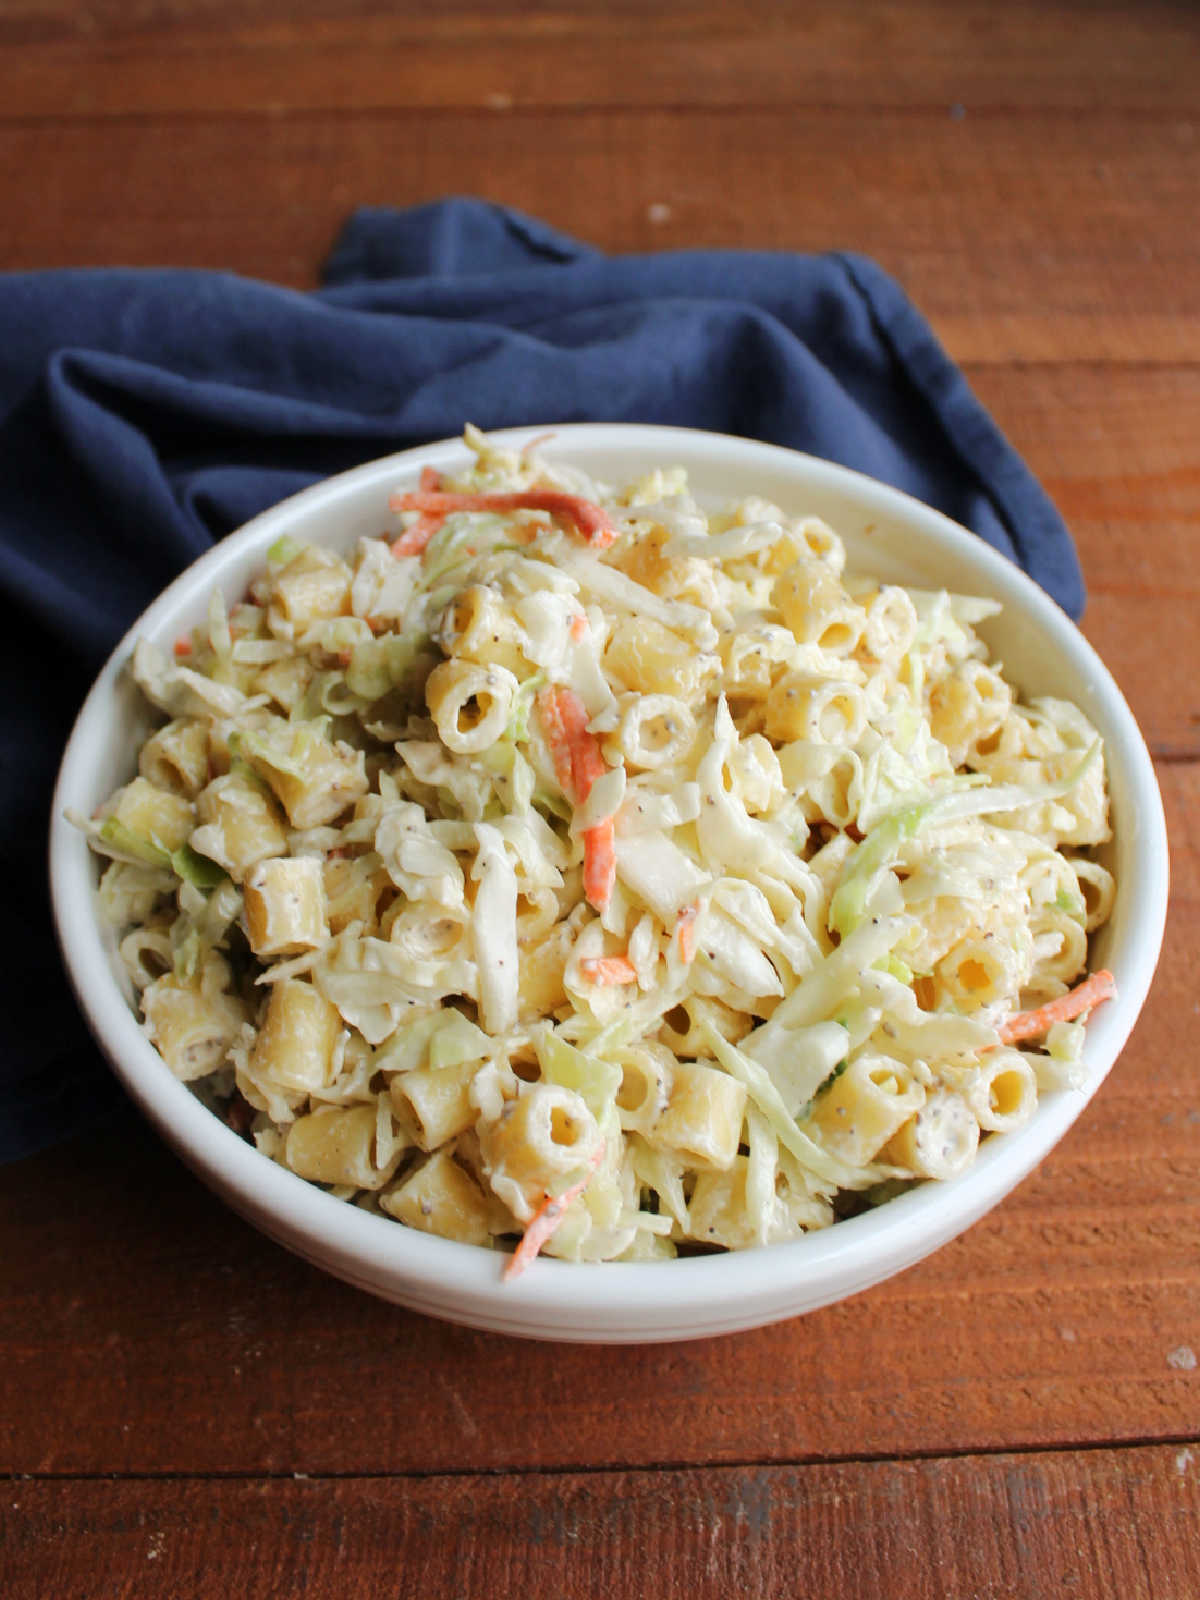 Serving bowl filled with creamy coleslaw macaroni salad.